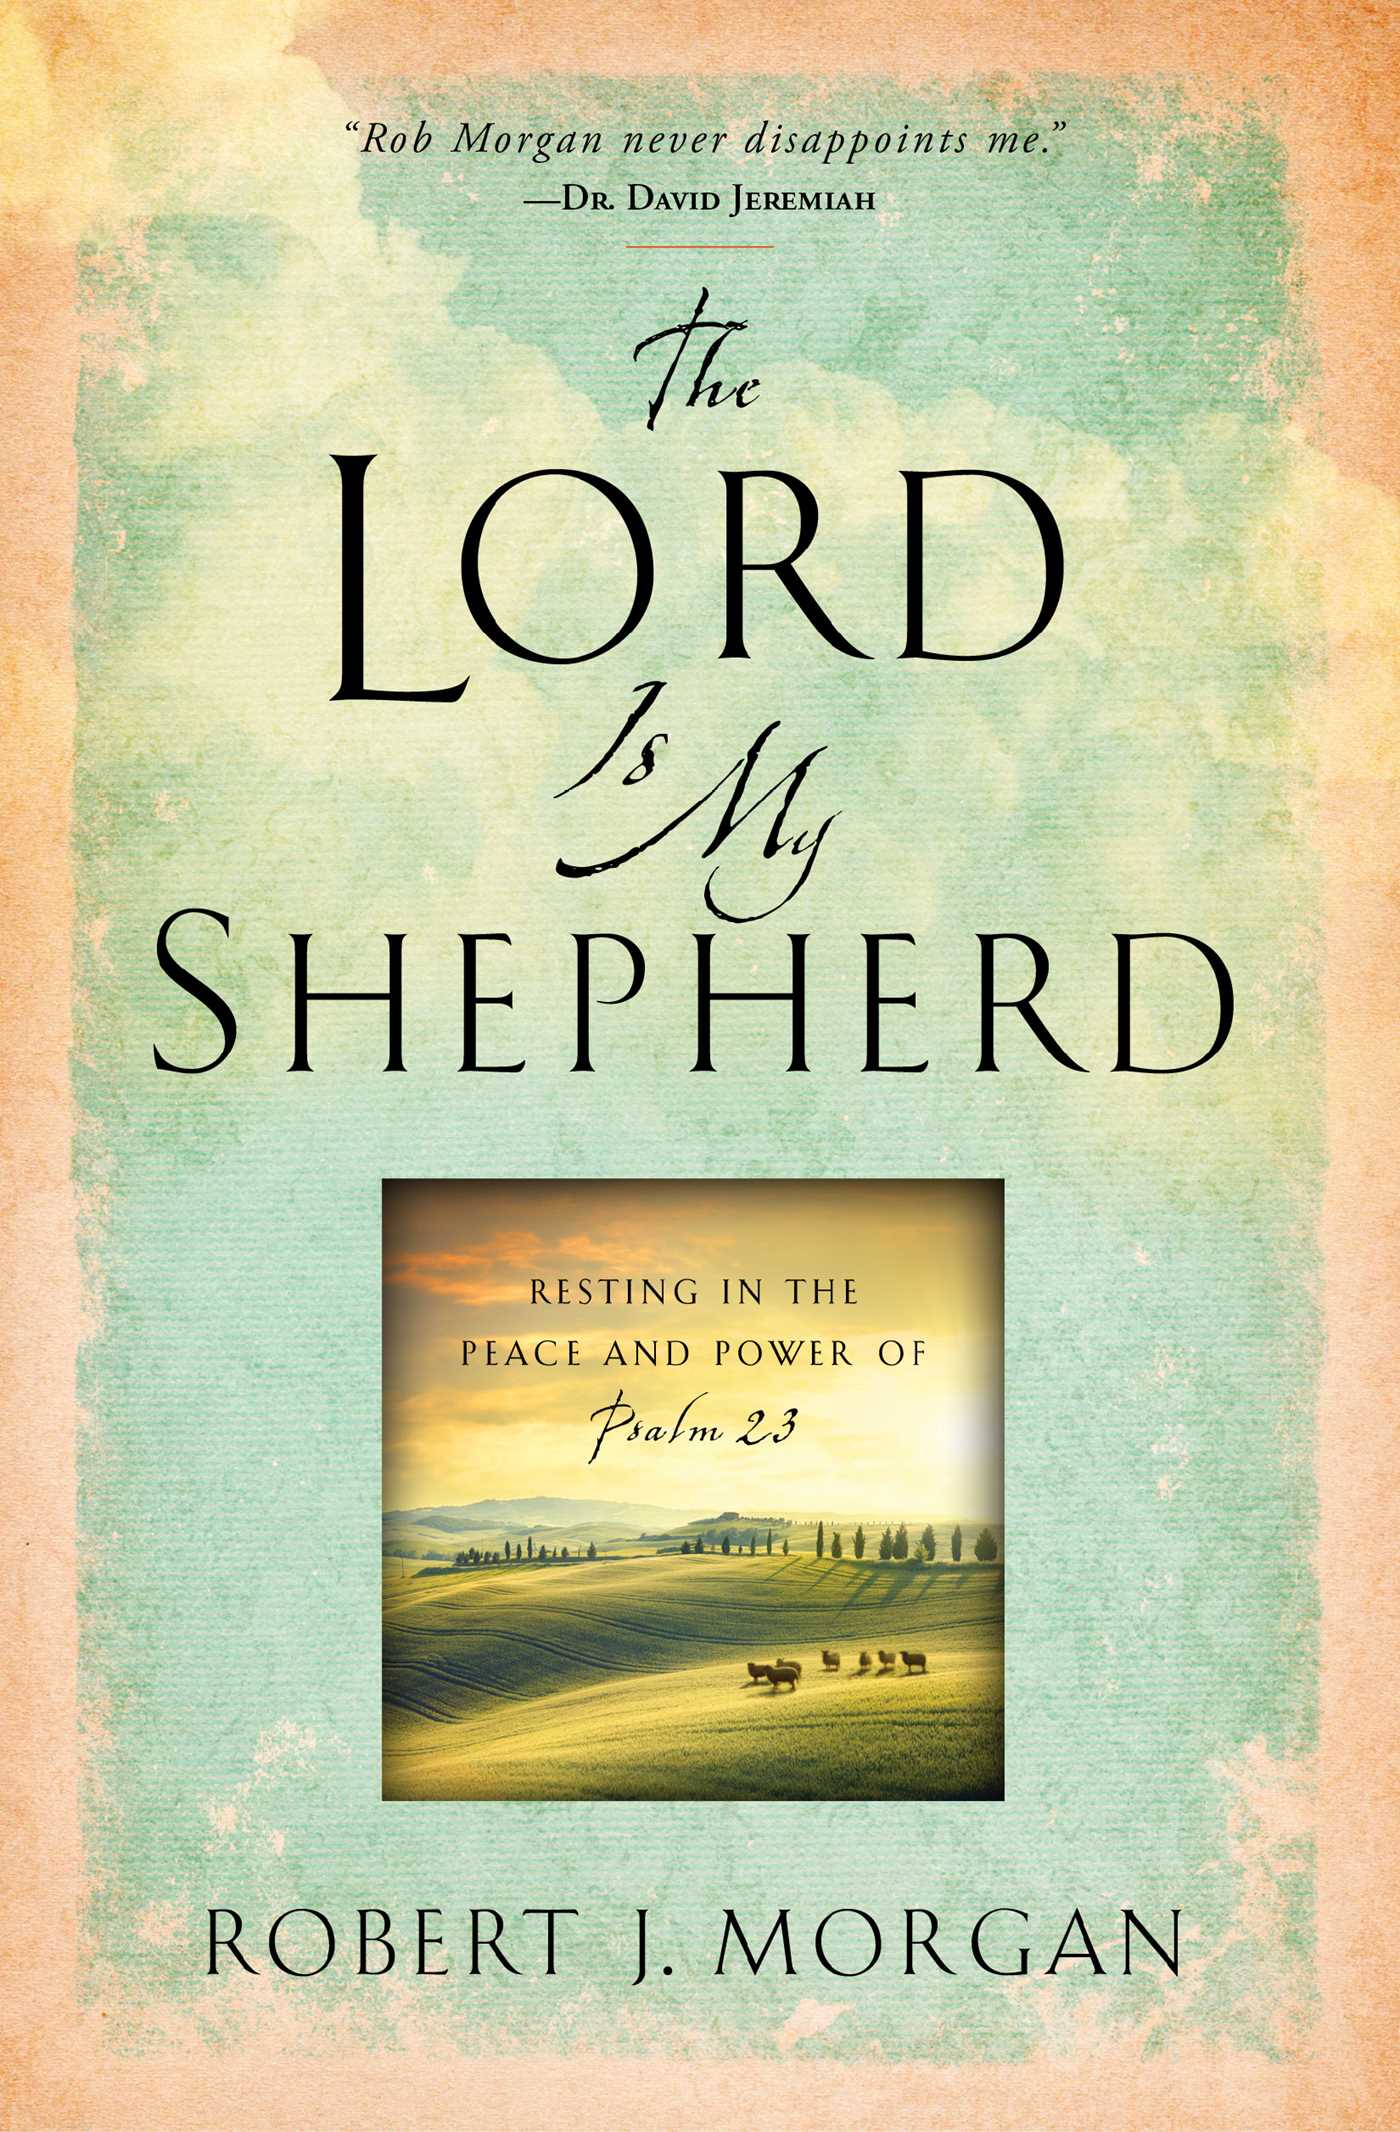 The Lord Is My Shepherd. Book by Robert J. Morgan. Official Publisher Page. Simon & Schuster